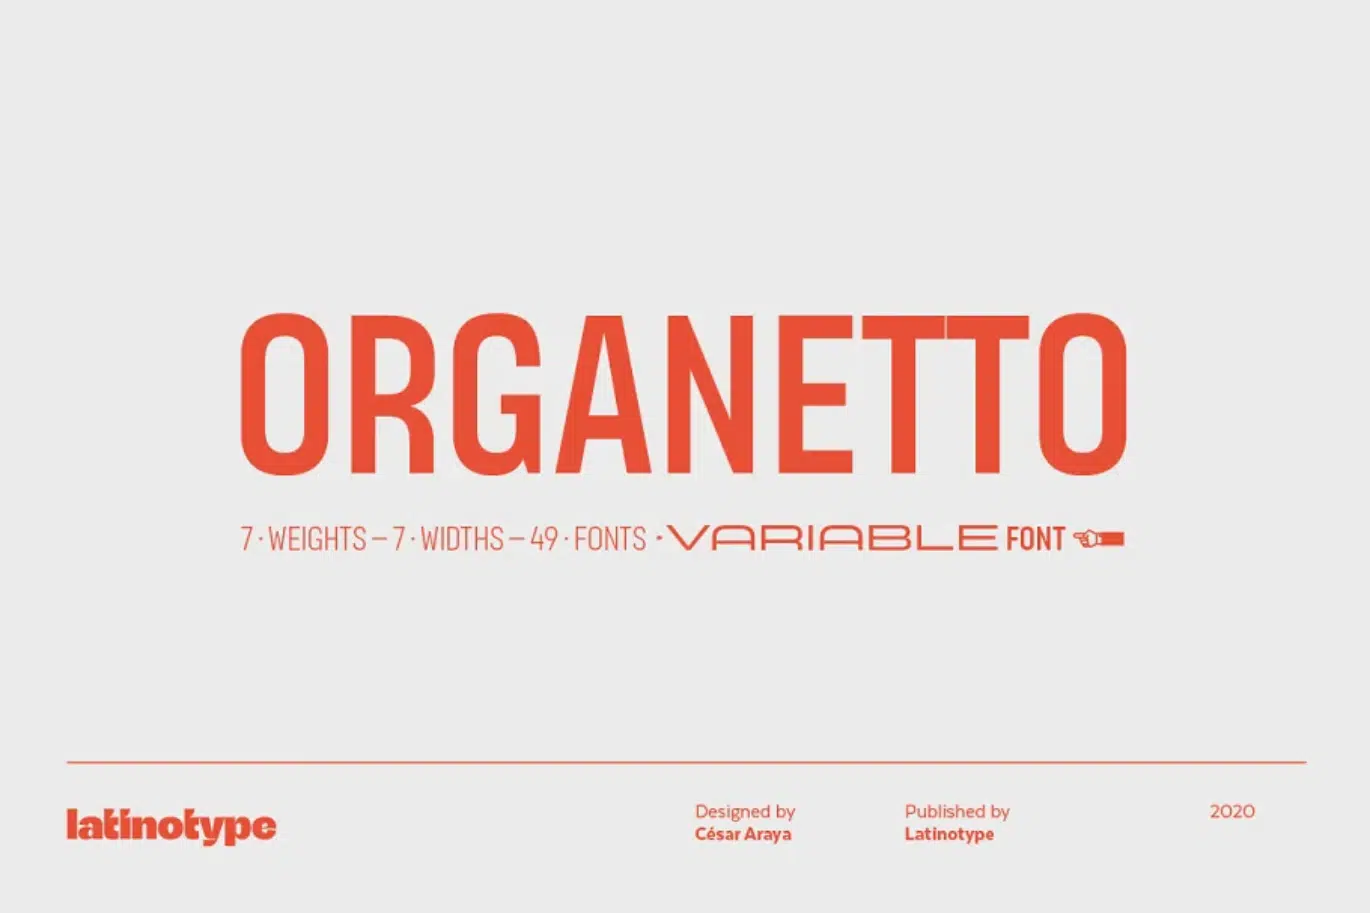 Organetto Font Similar To Raleway